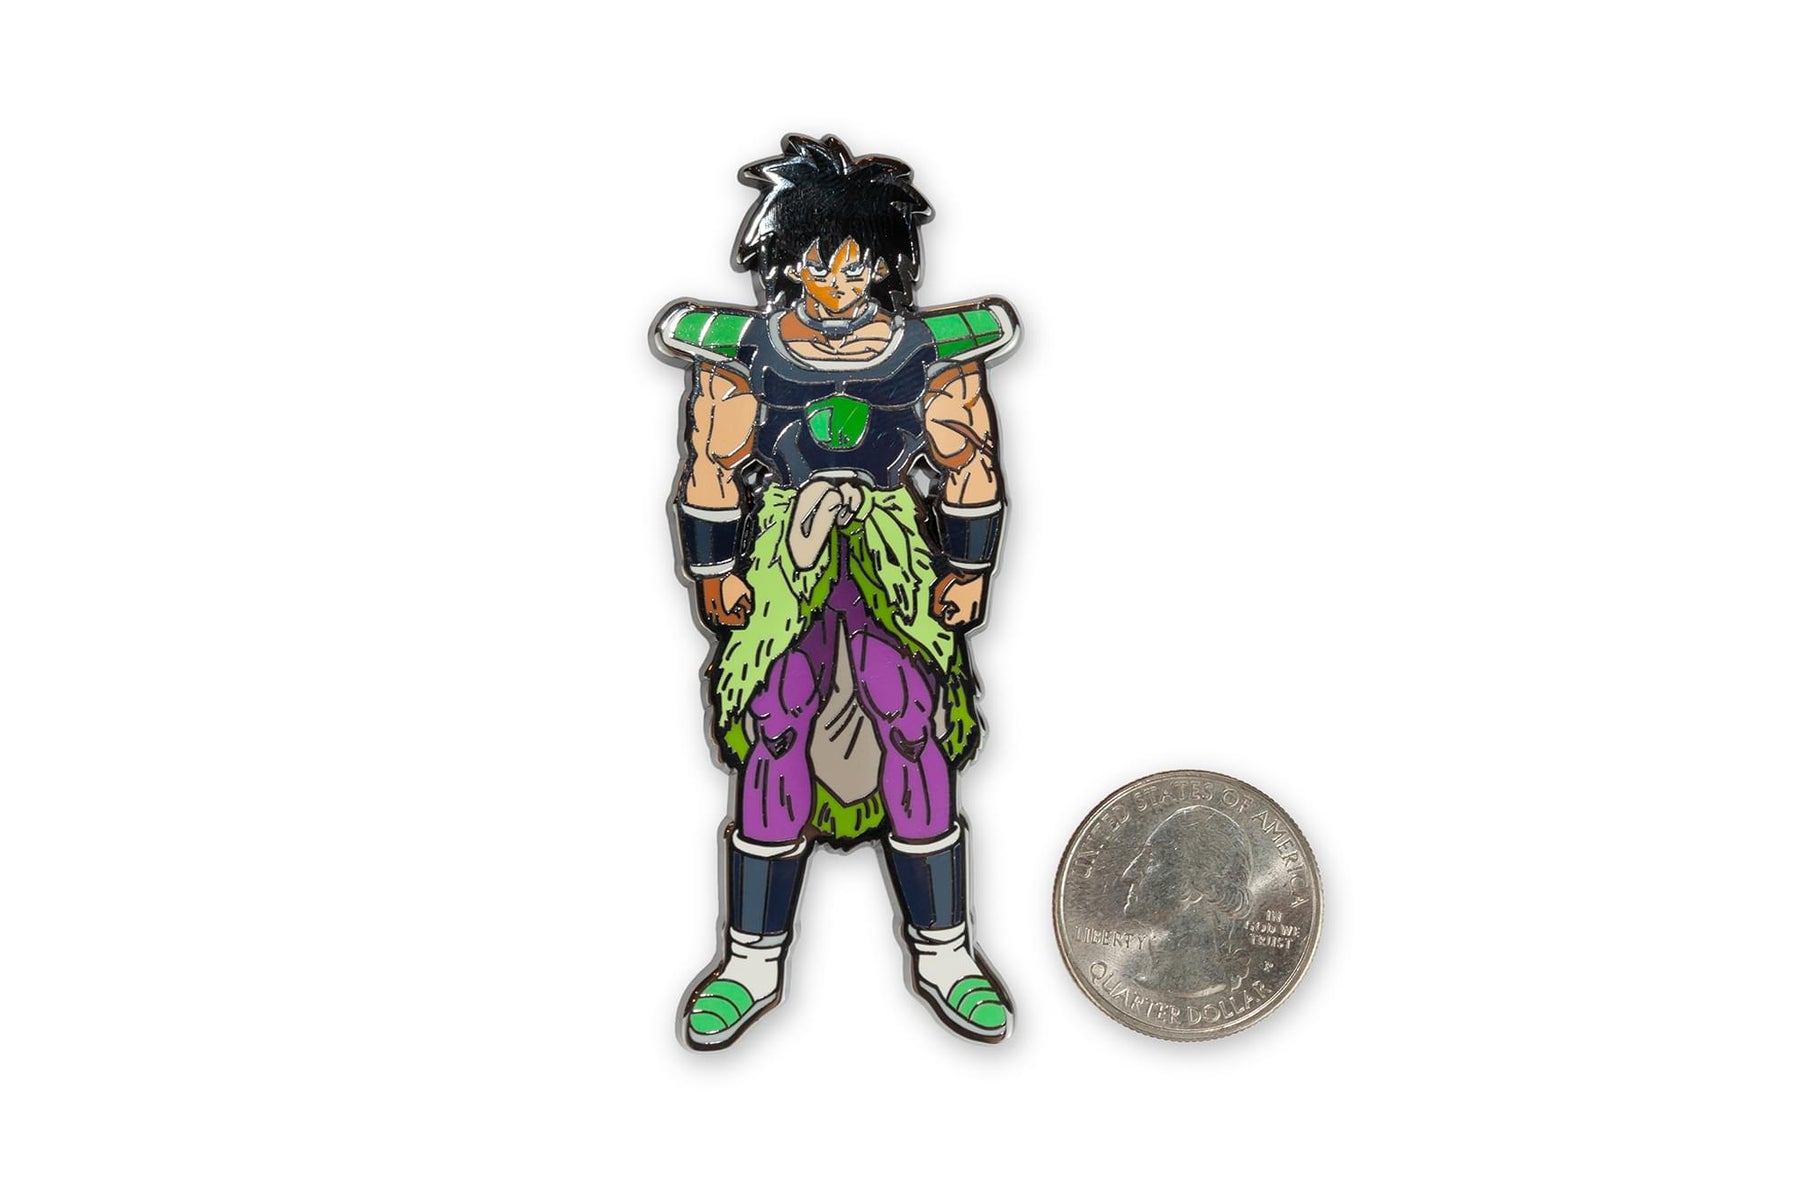 Dragon Ball Super 3-Inch Collectible Enamel FiGPiN - Broly #217 Toynk Exclusive